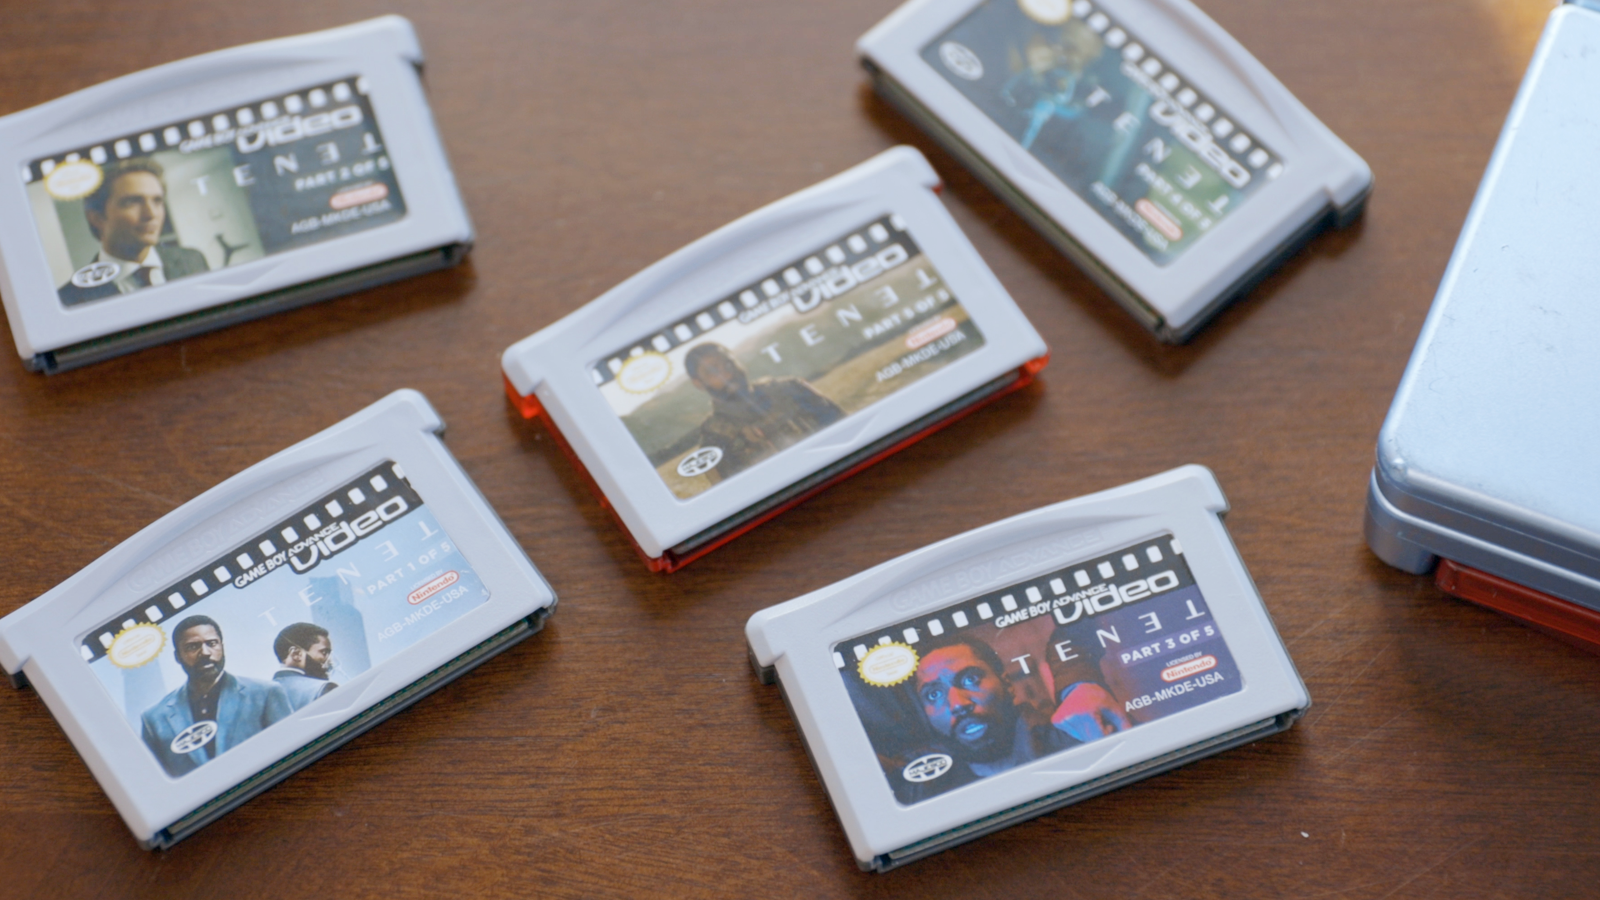 Forget IMAX, Let’s Behold ‘Tenet’ On a Game Boy